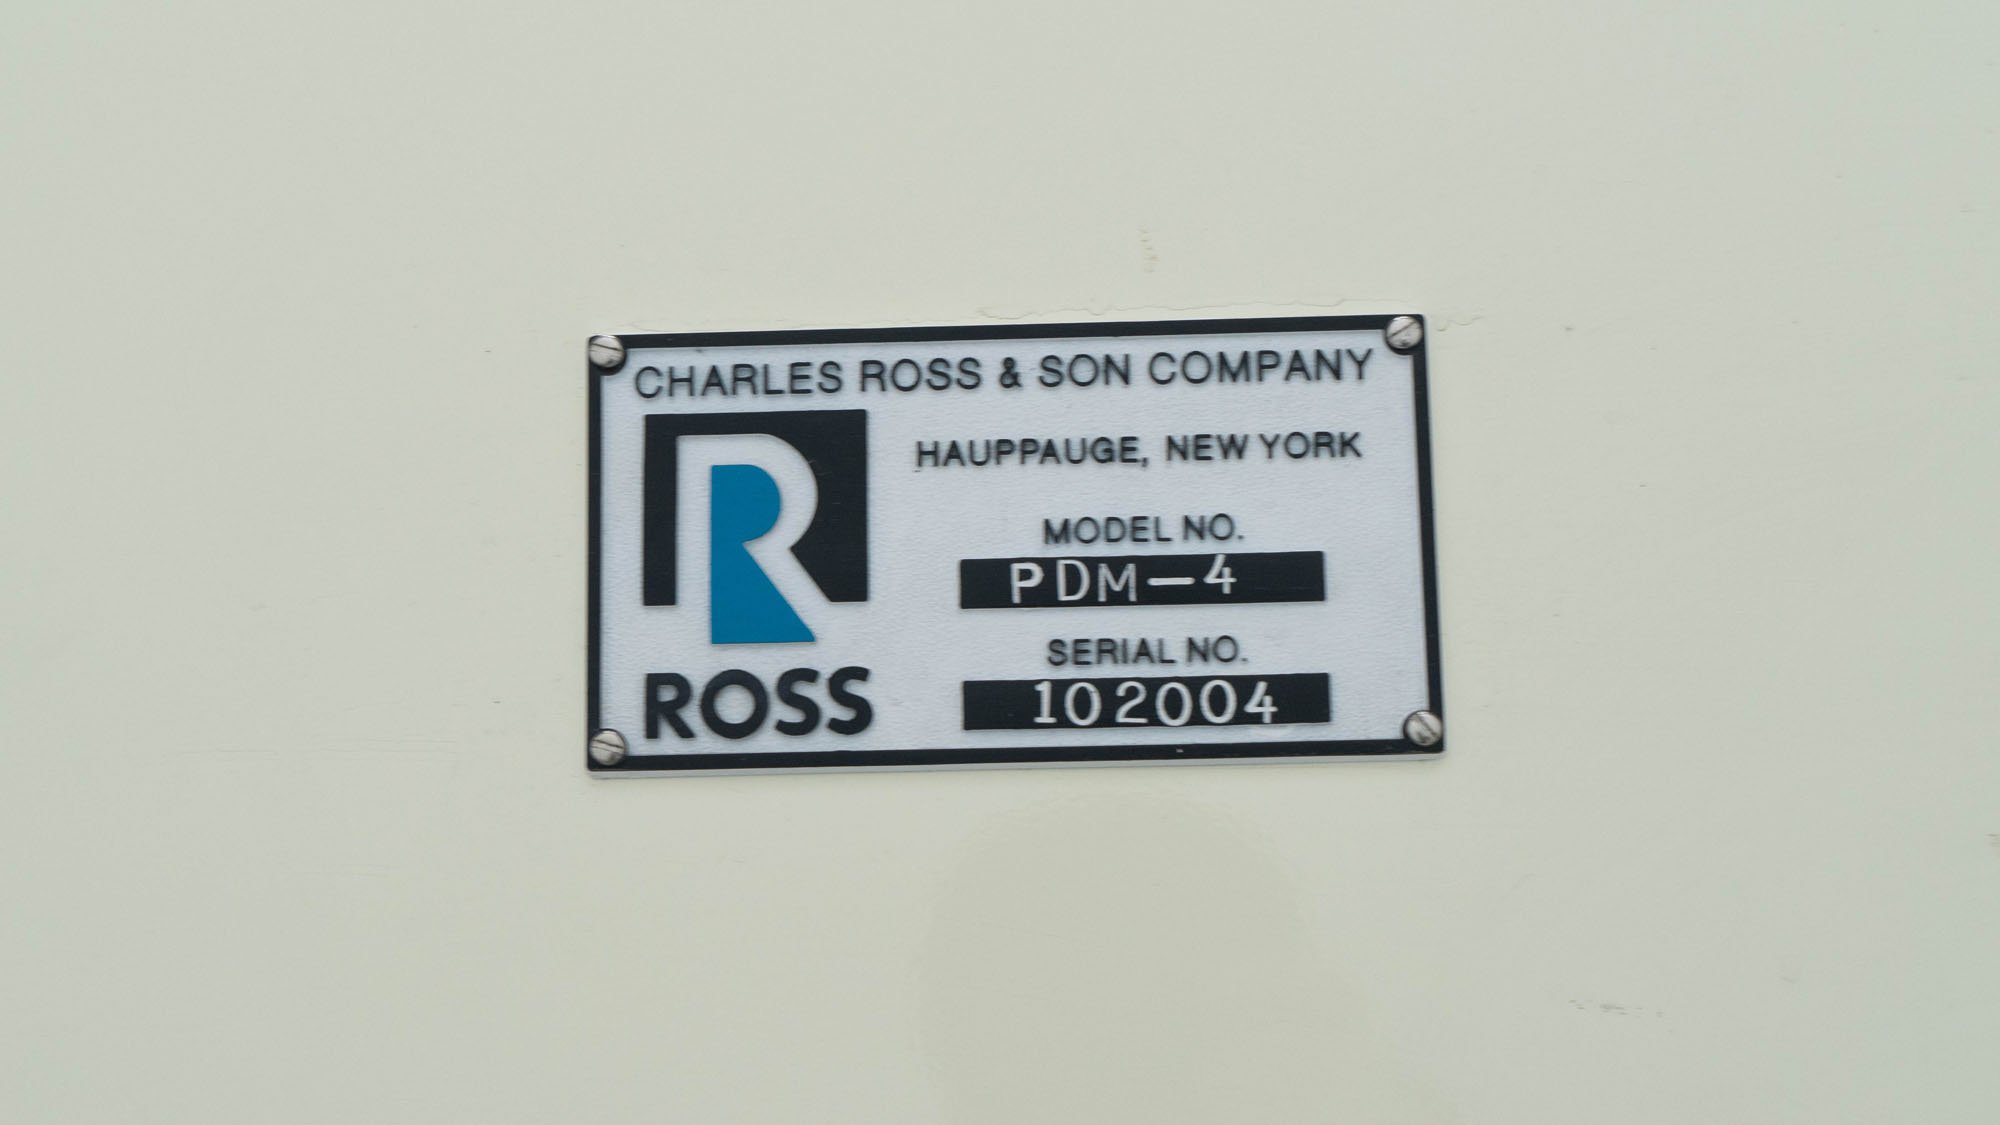 4 Gal Ross Planetary Mixer, Model PDM-4 with Press, S/S